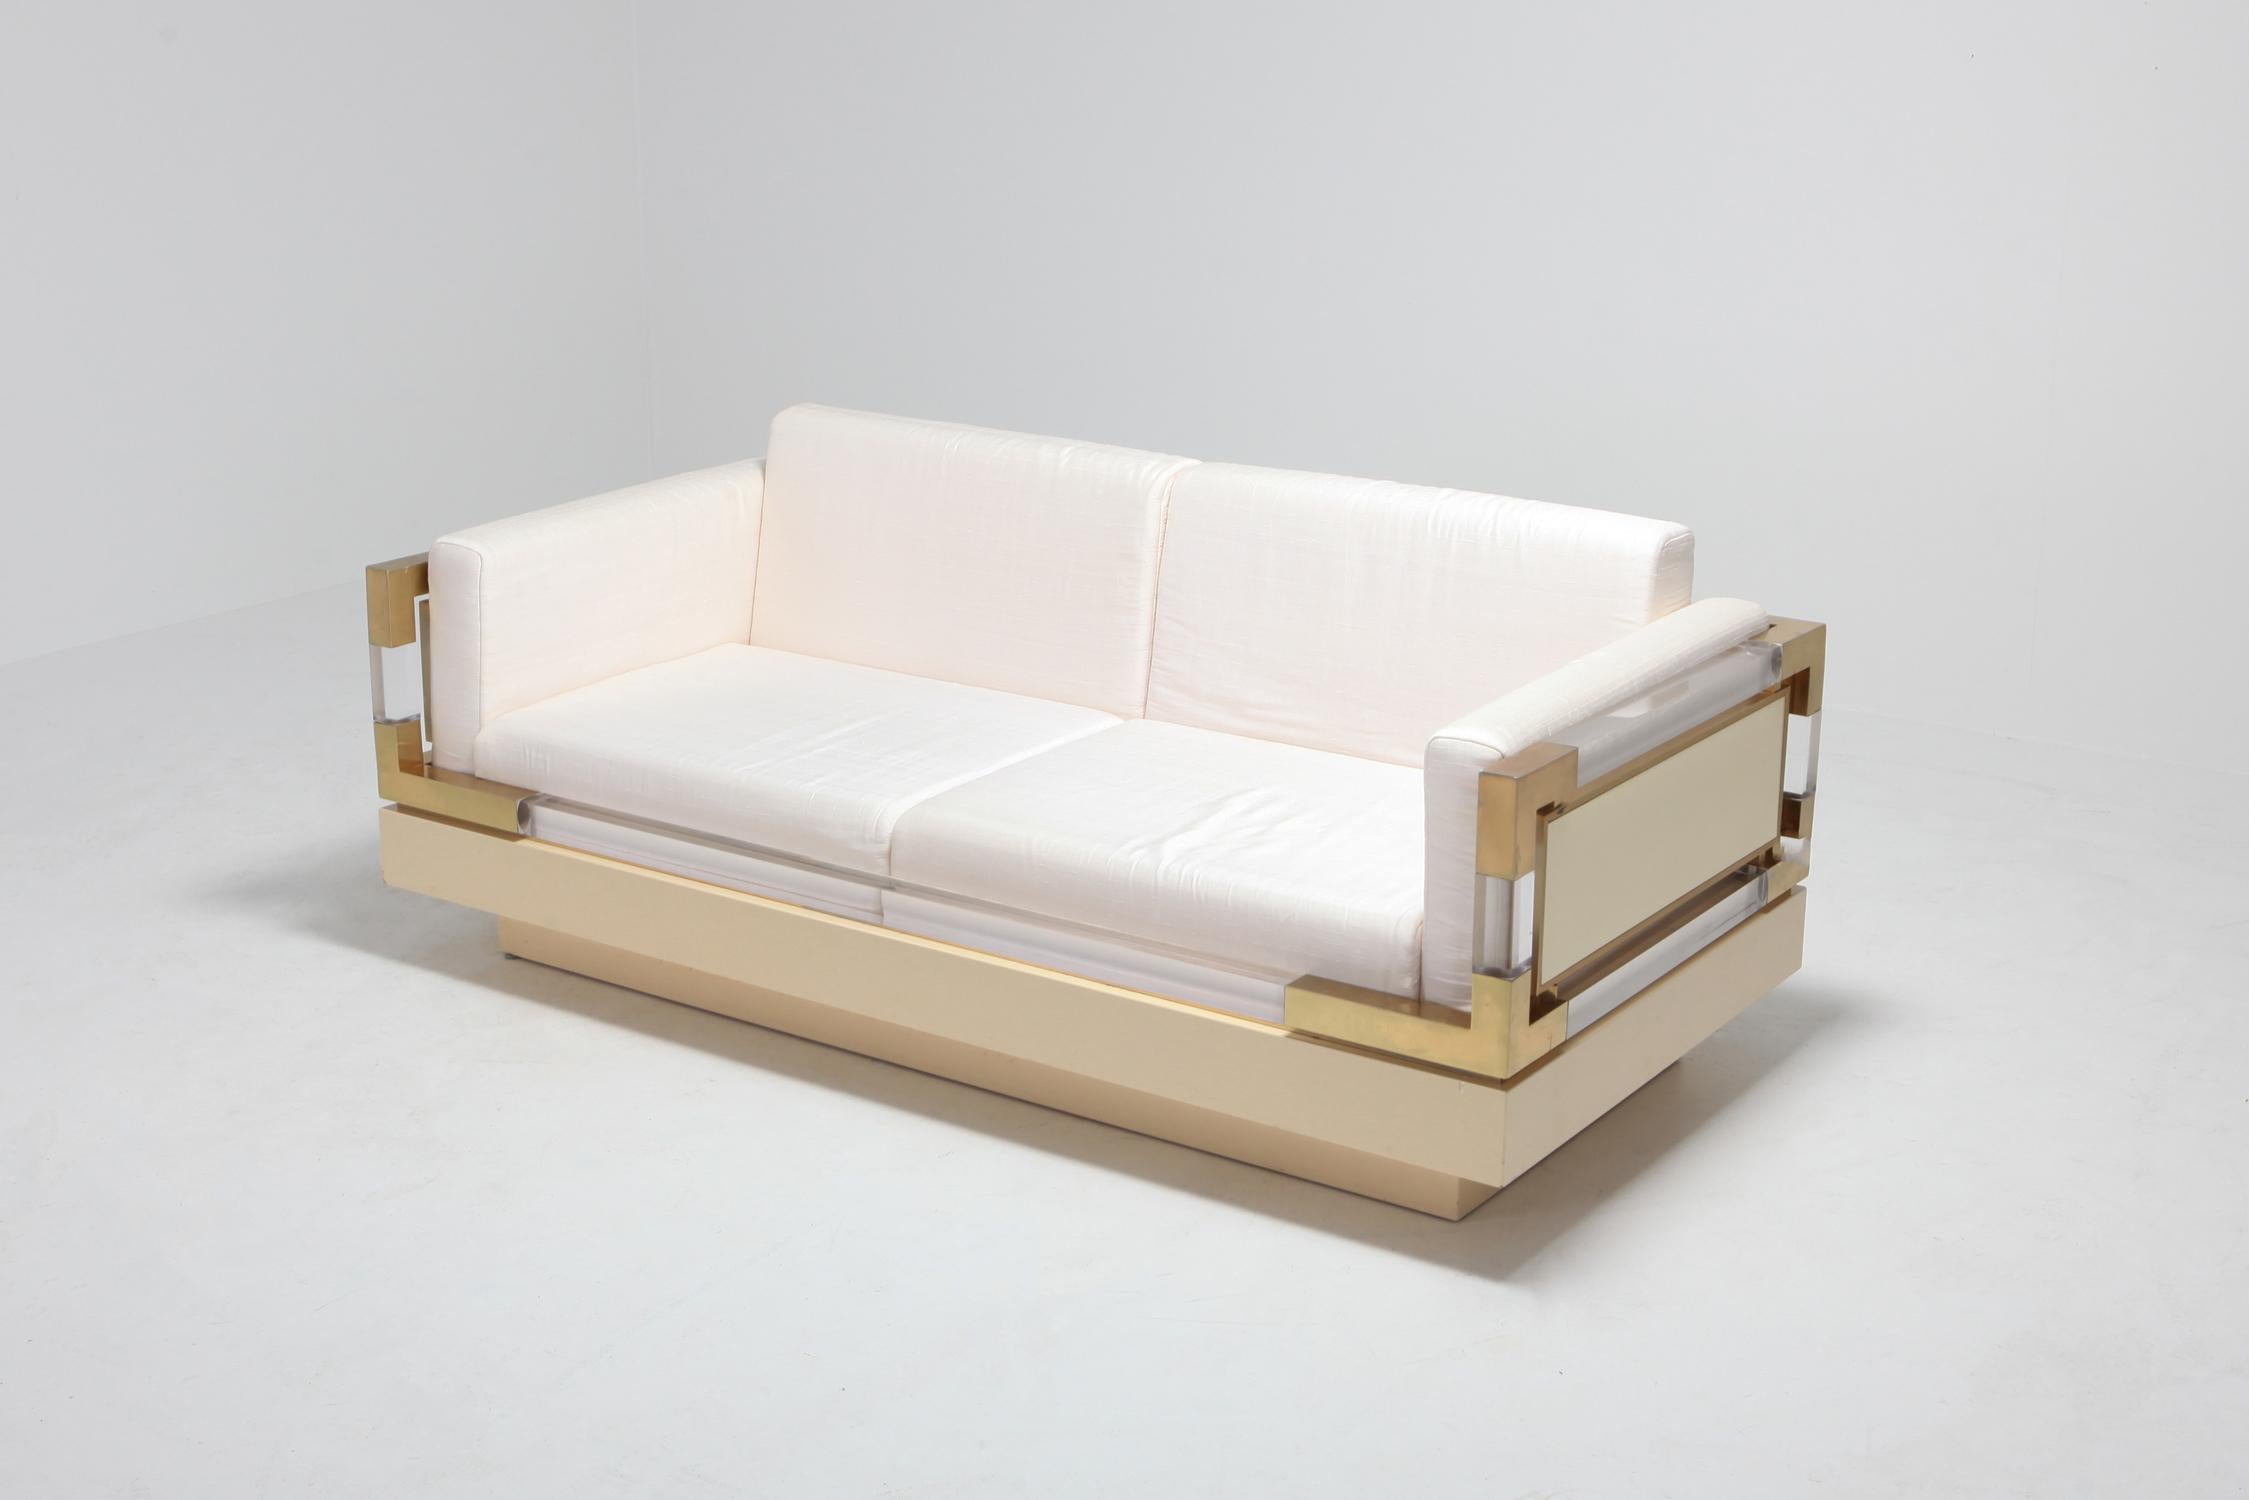 Charles Hollis Jones designed this 2.5-seat sofa in the 1970s
Very modern design which resembles a bit the Jacques Charpentier sofas.
The combination of lacquer lucite and brass was also very contemporary and chic in the 1970s. The piece fits well